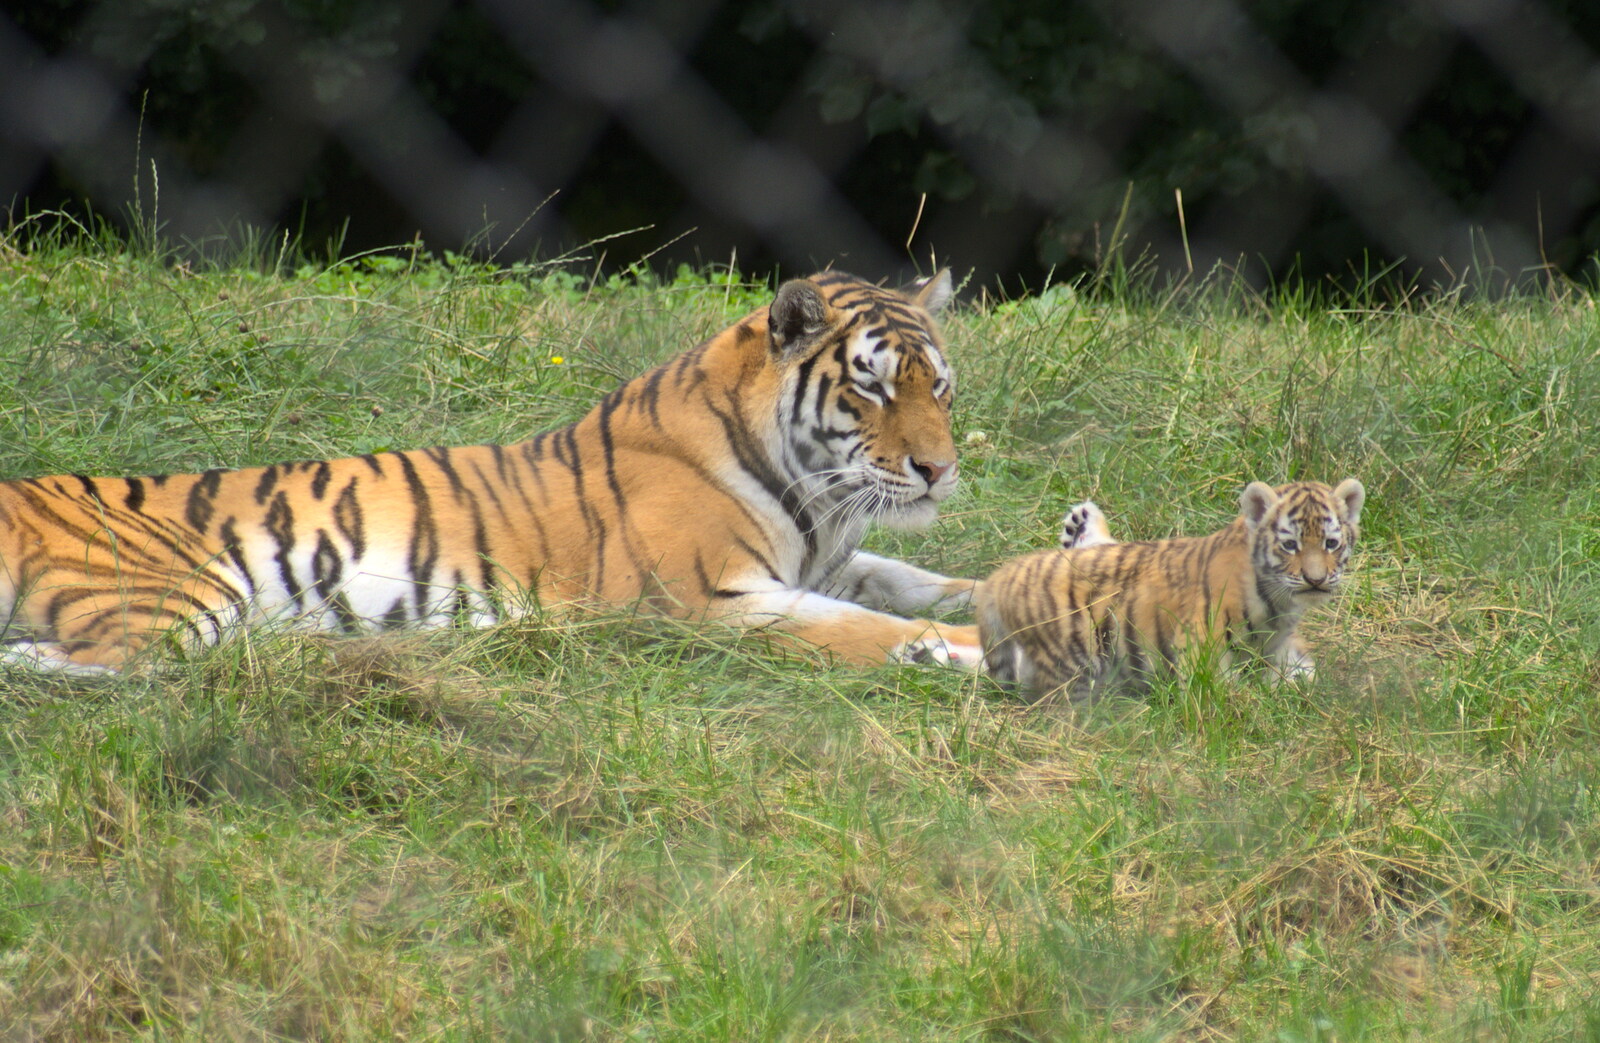 A tiger and one of its new cubs from Tiger Cubs at Banham Zoo, Banham, Norfolk - 6th August 2013